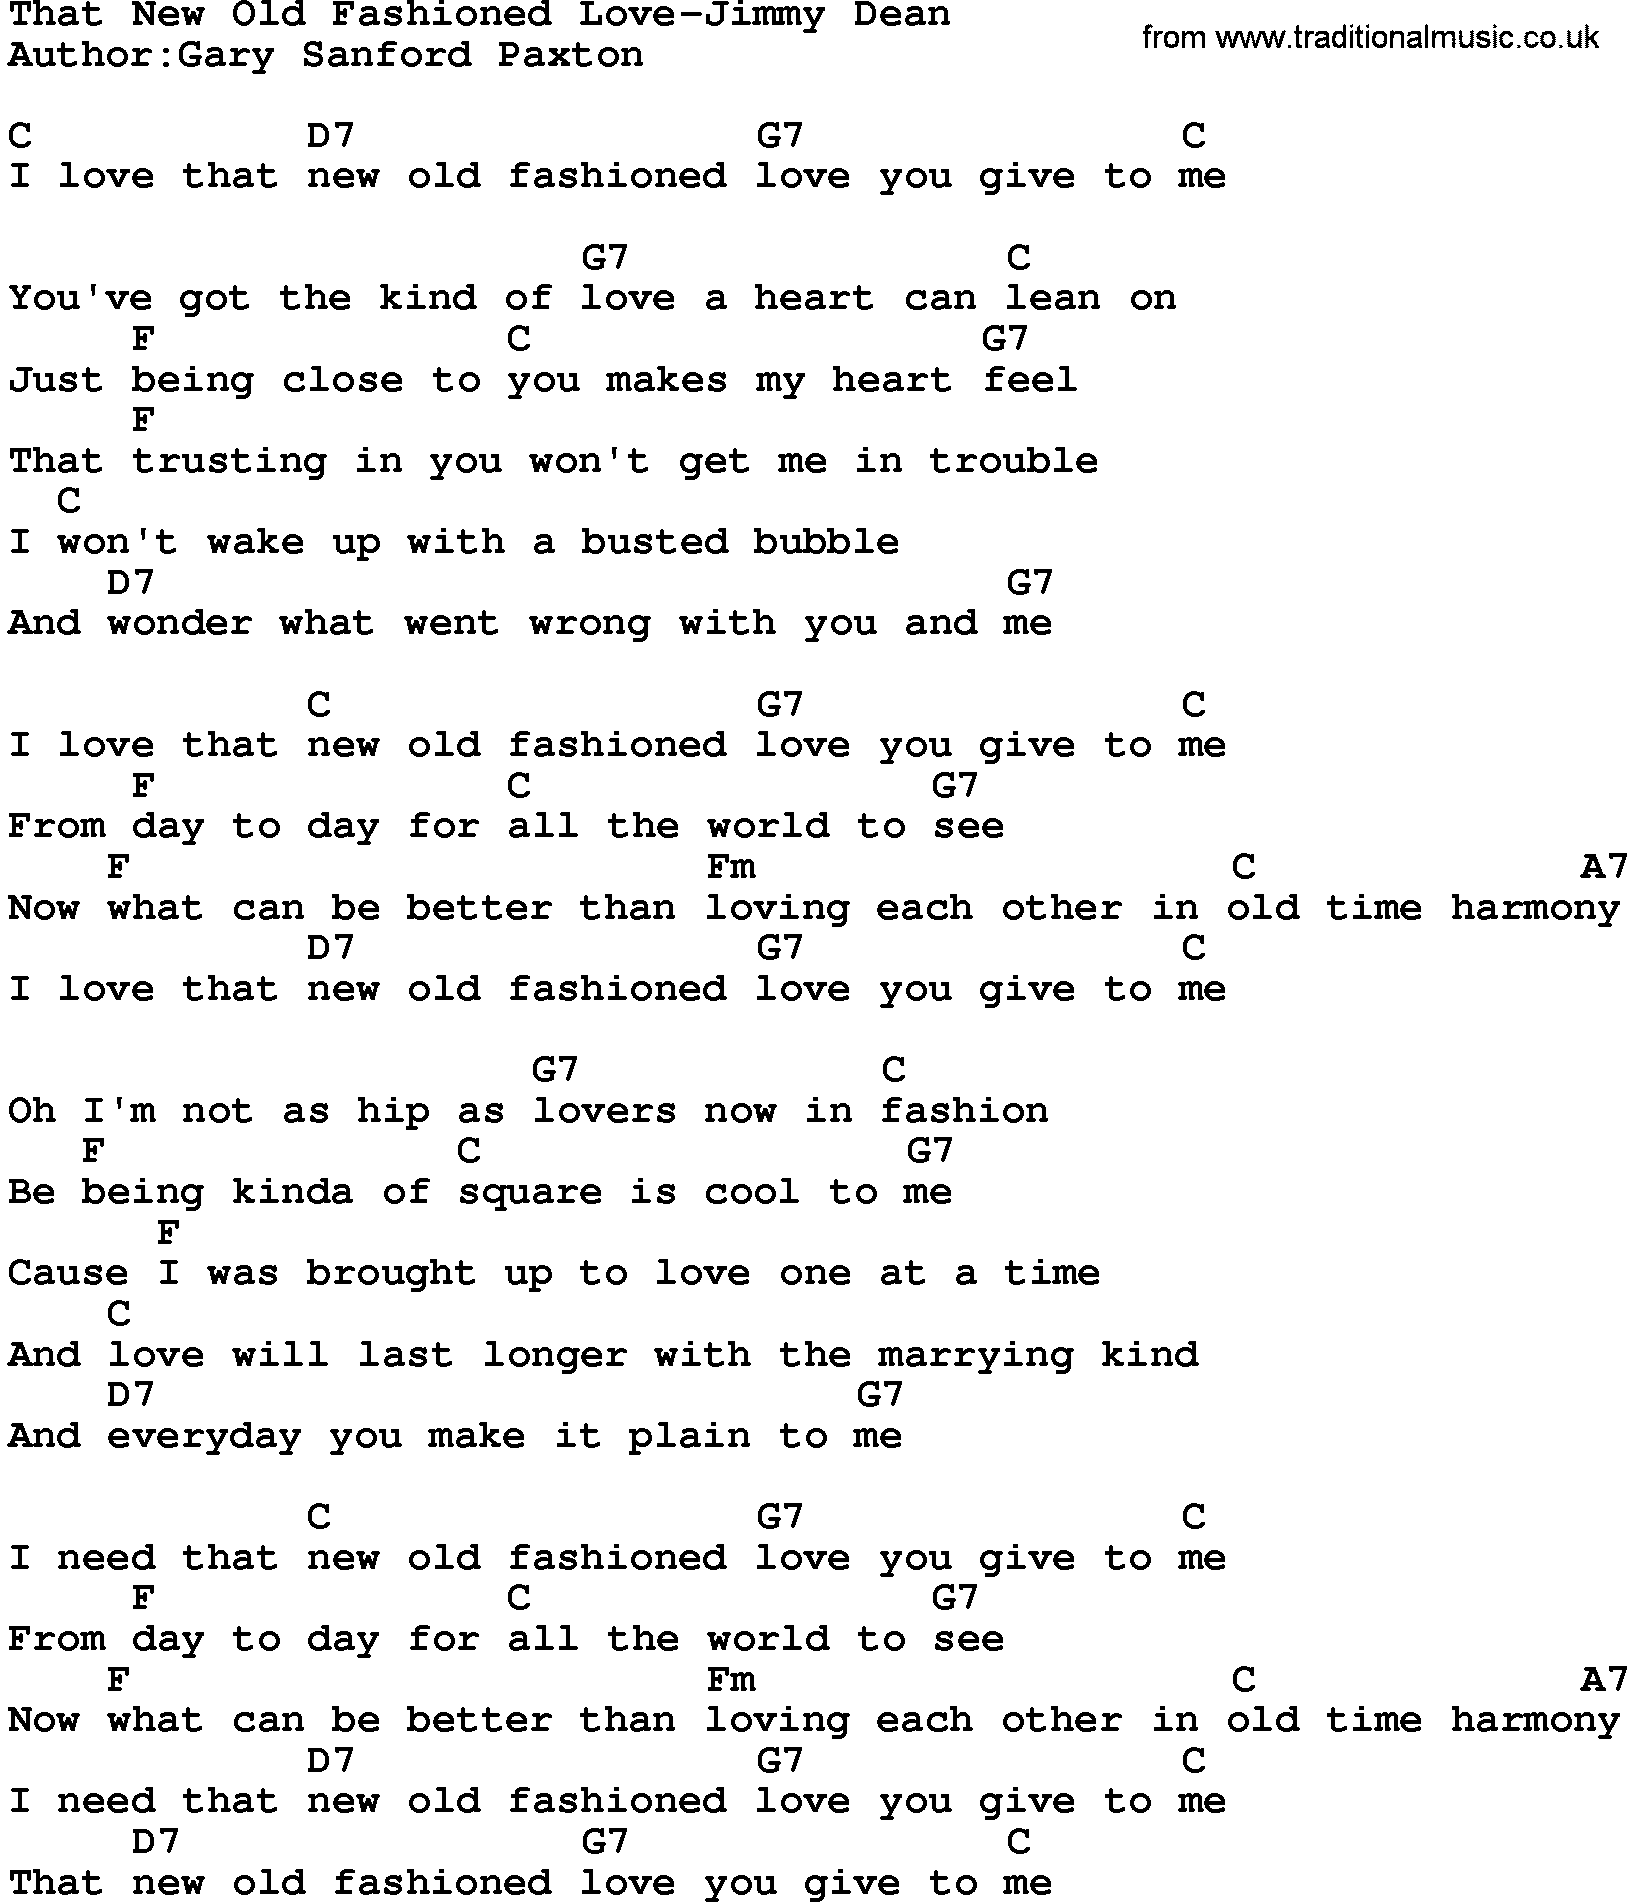 Country music song: That New Old Fashioned Love-Jimmy Dean lyrics and chords